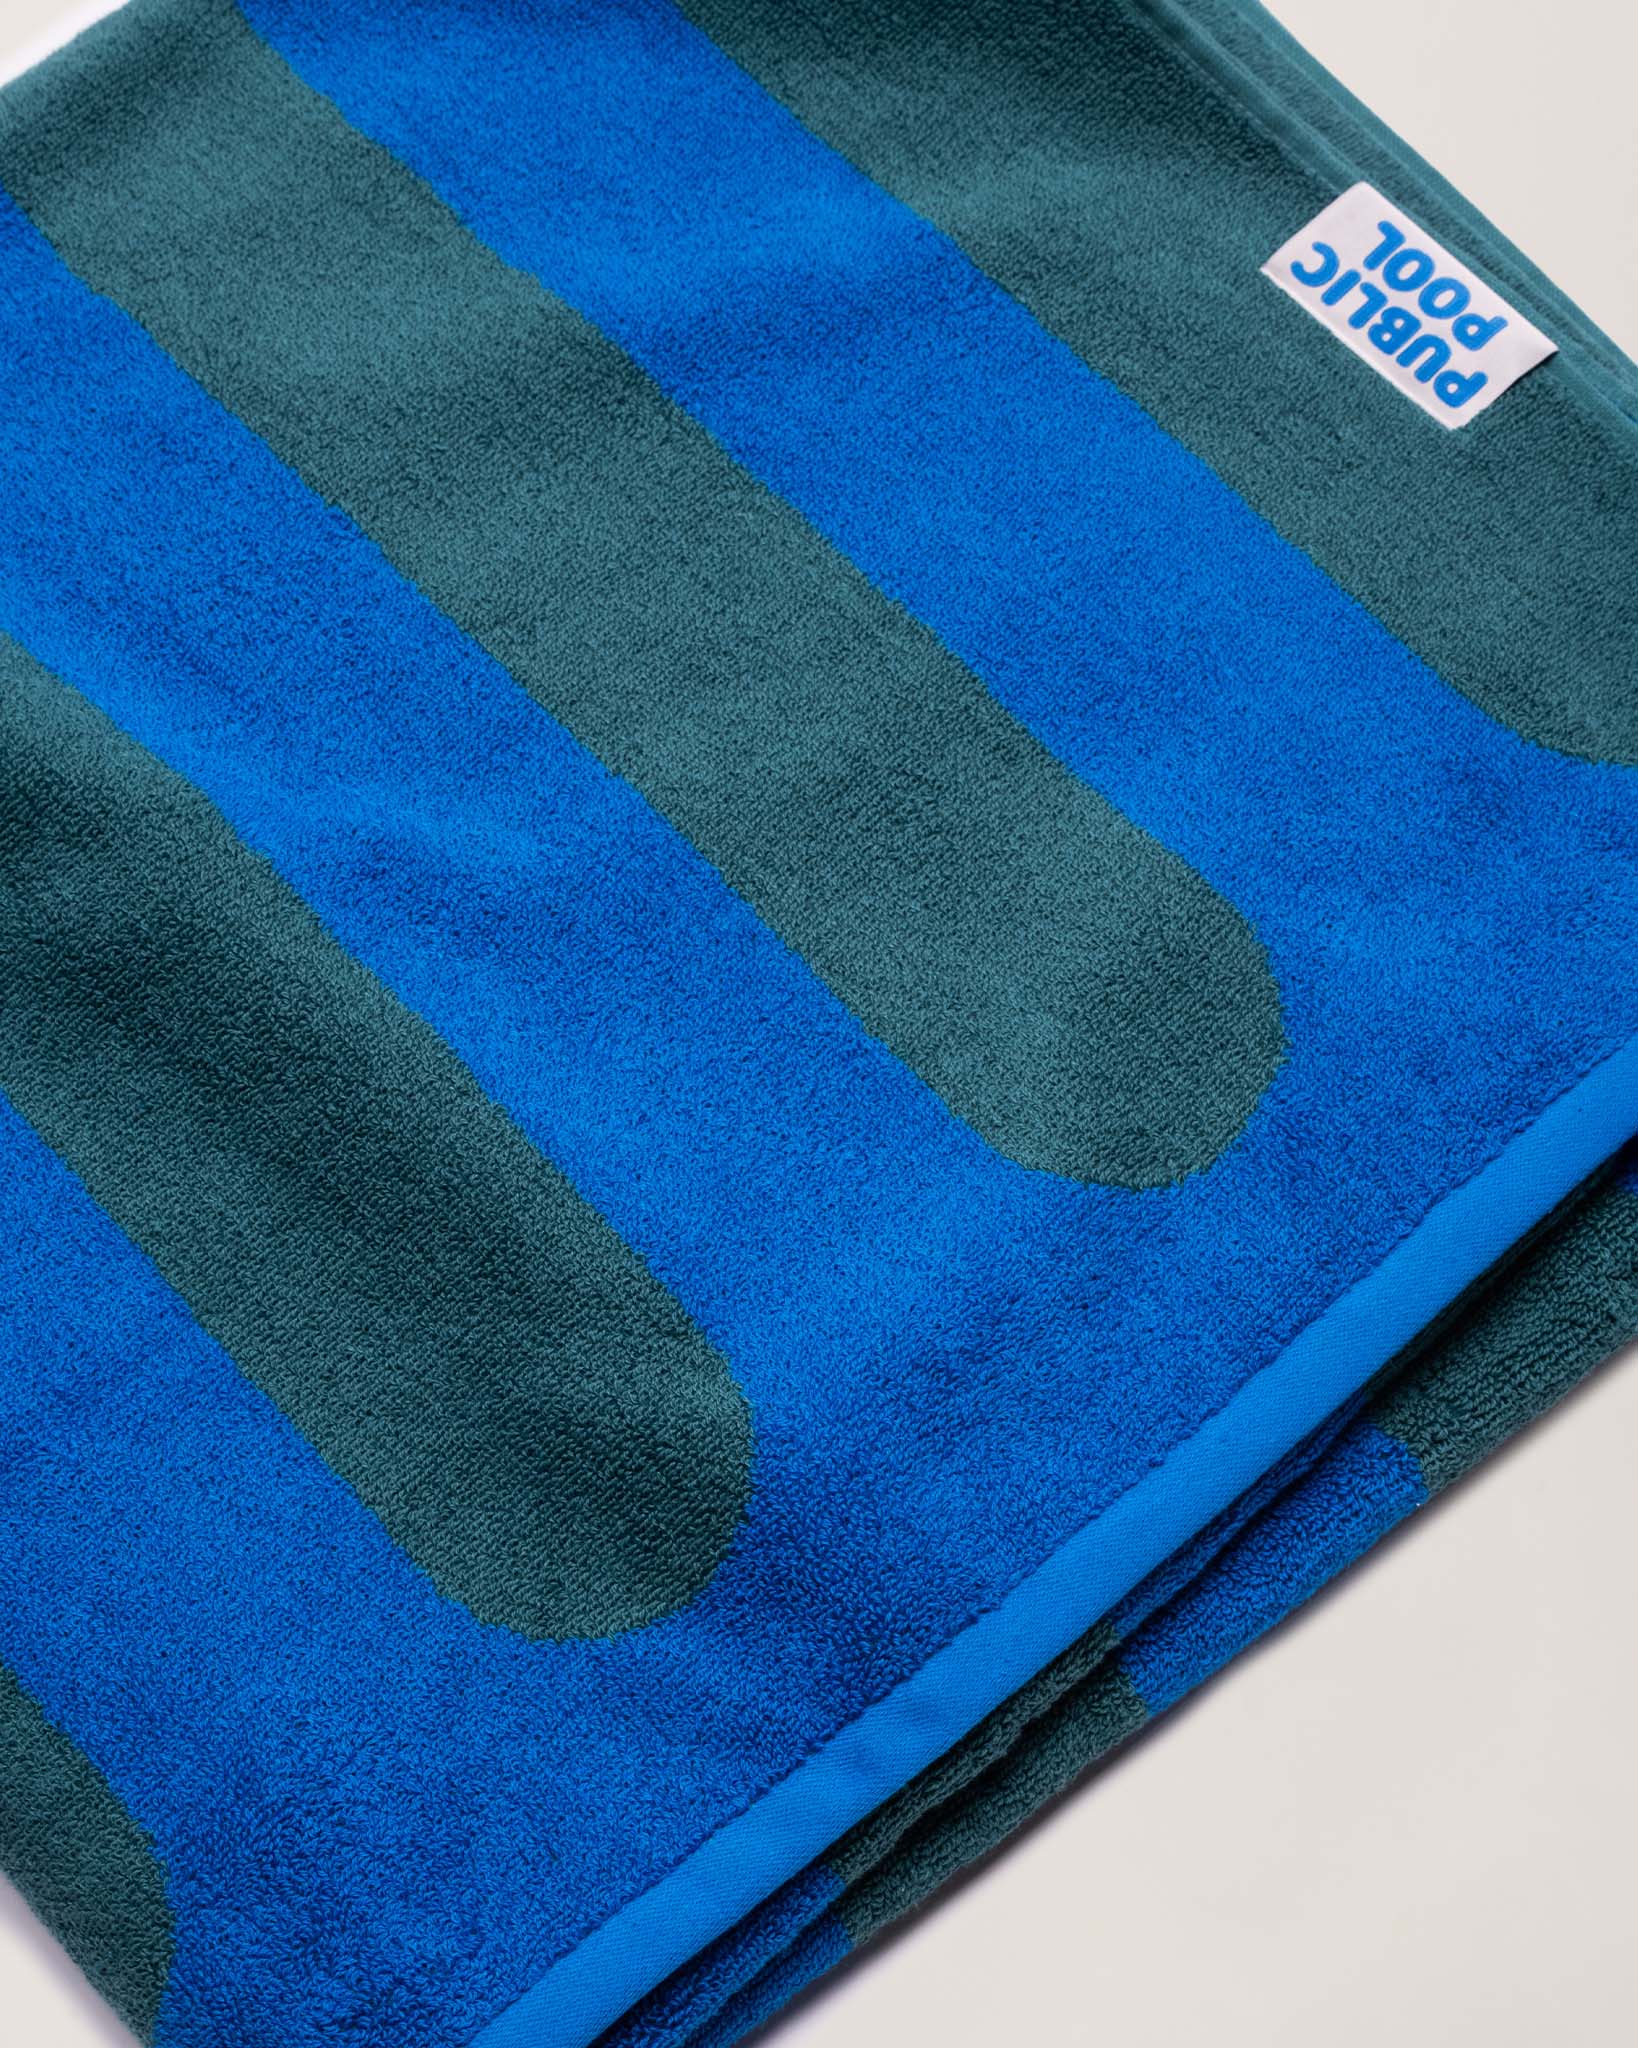 A folded blue and green striped towel. 